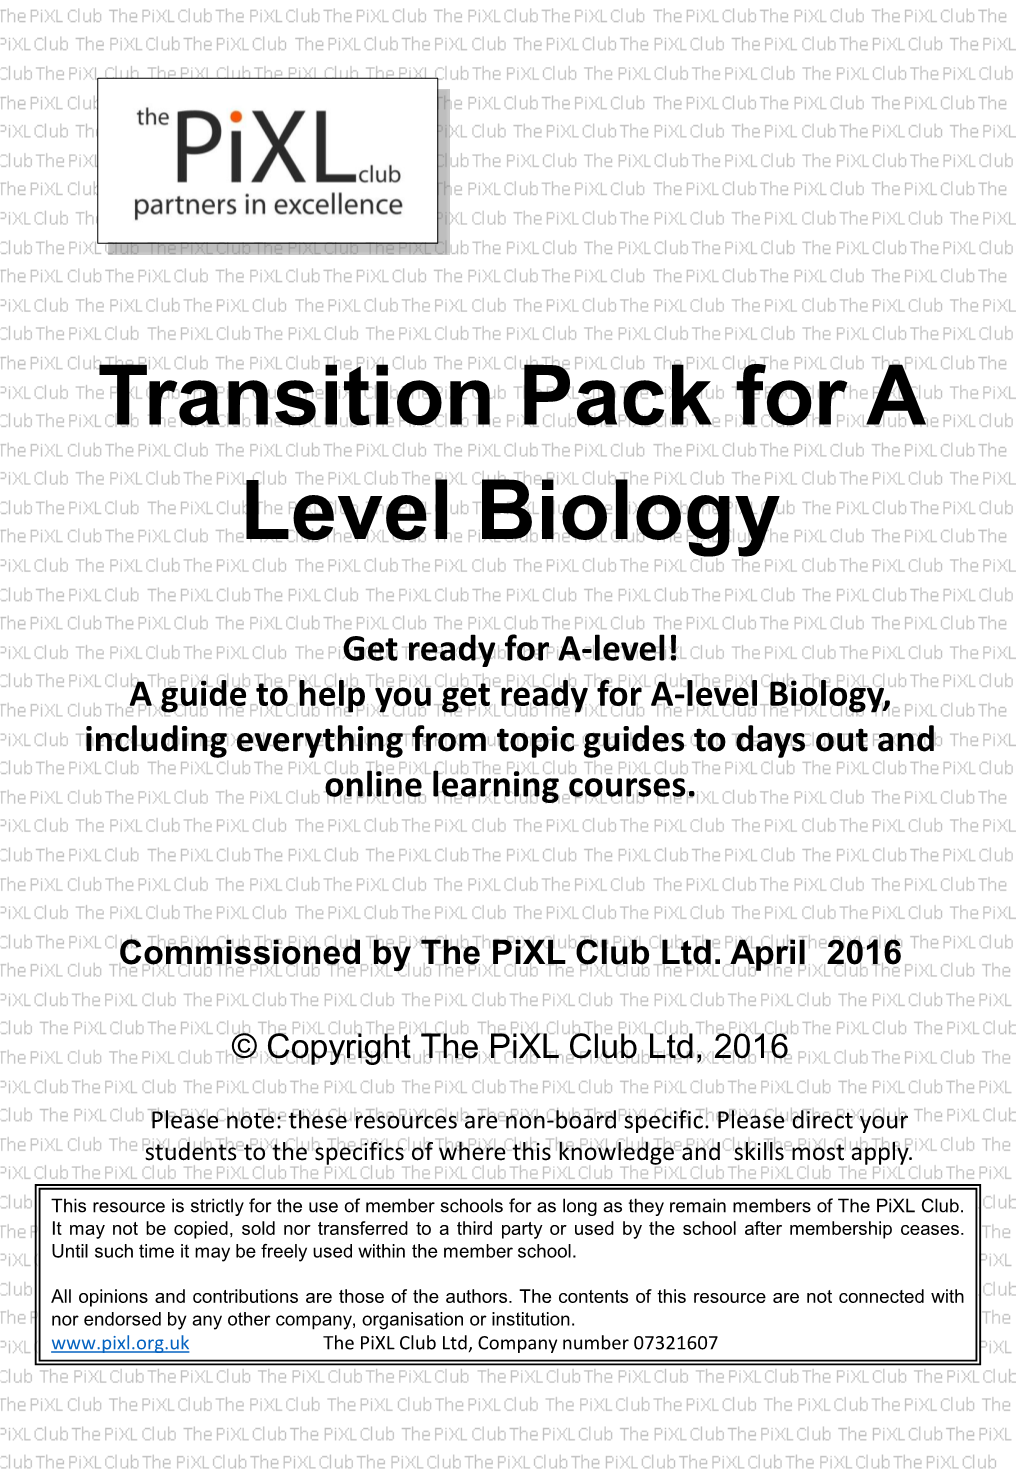 Transition Pack for a Level Biology